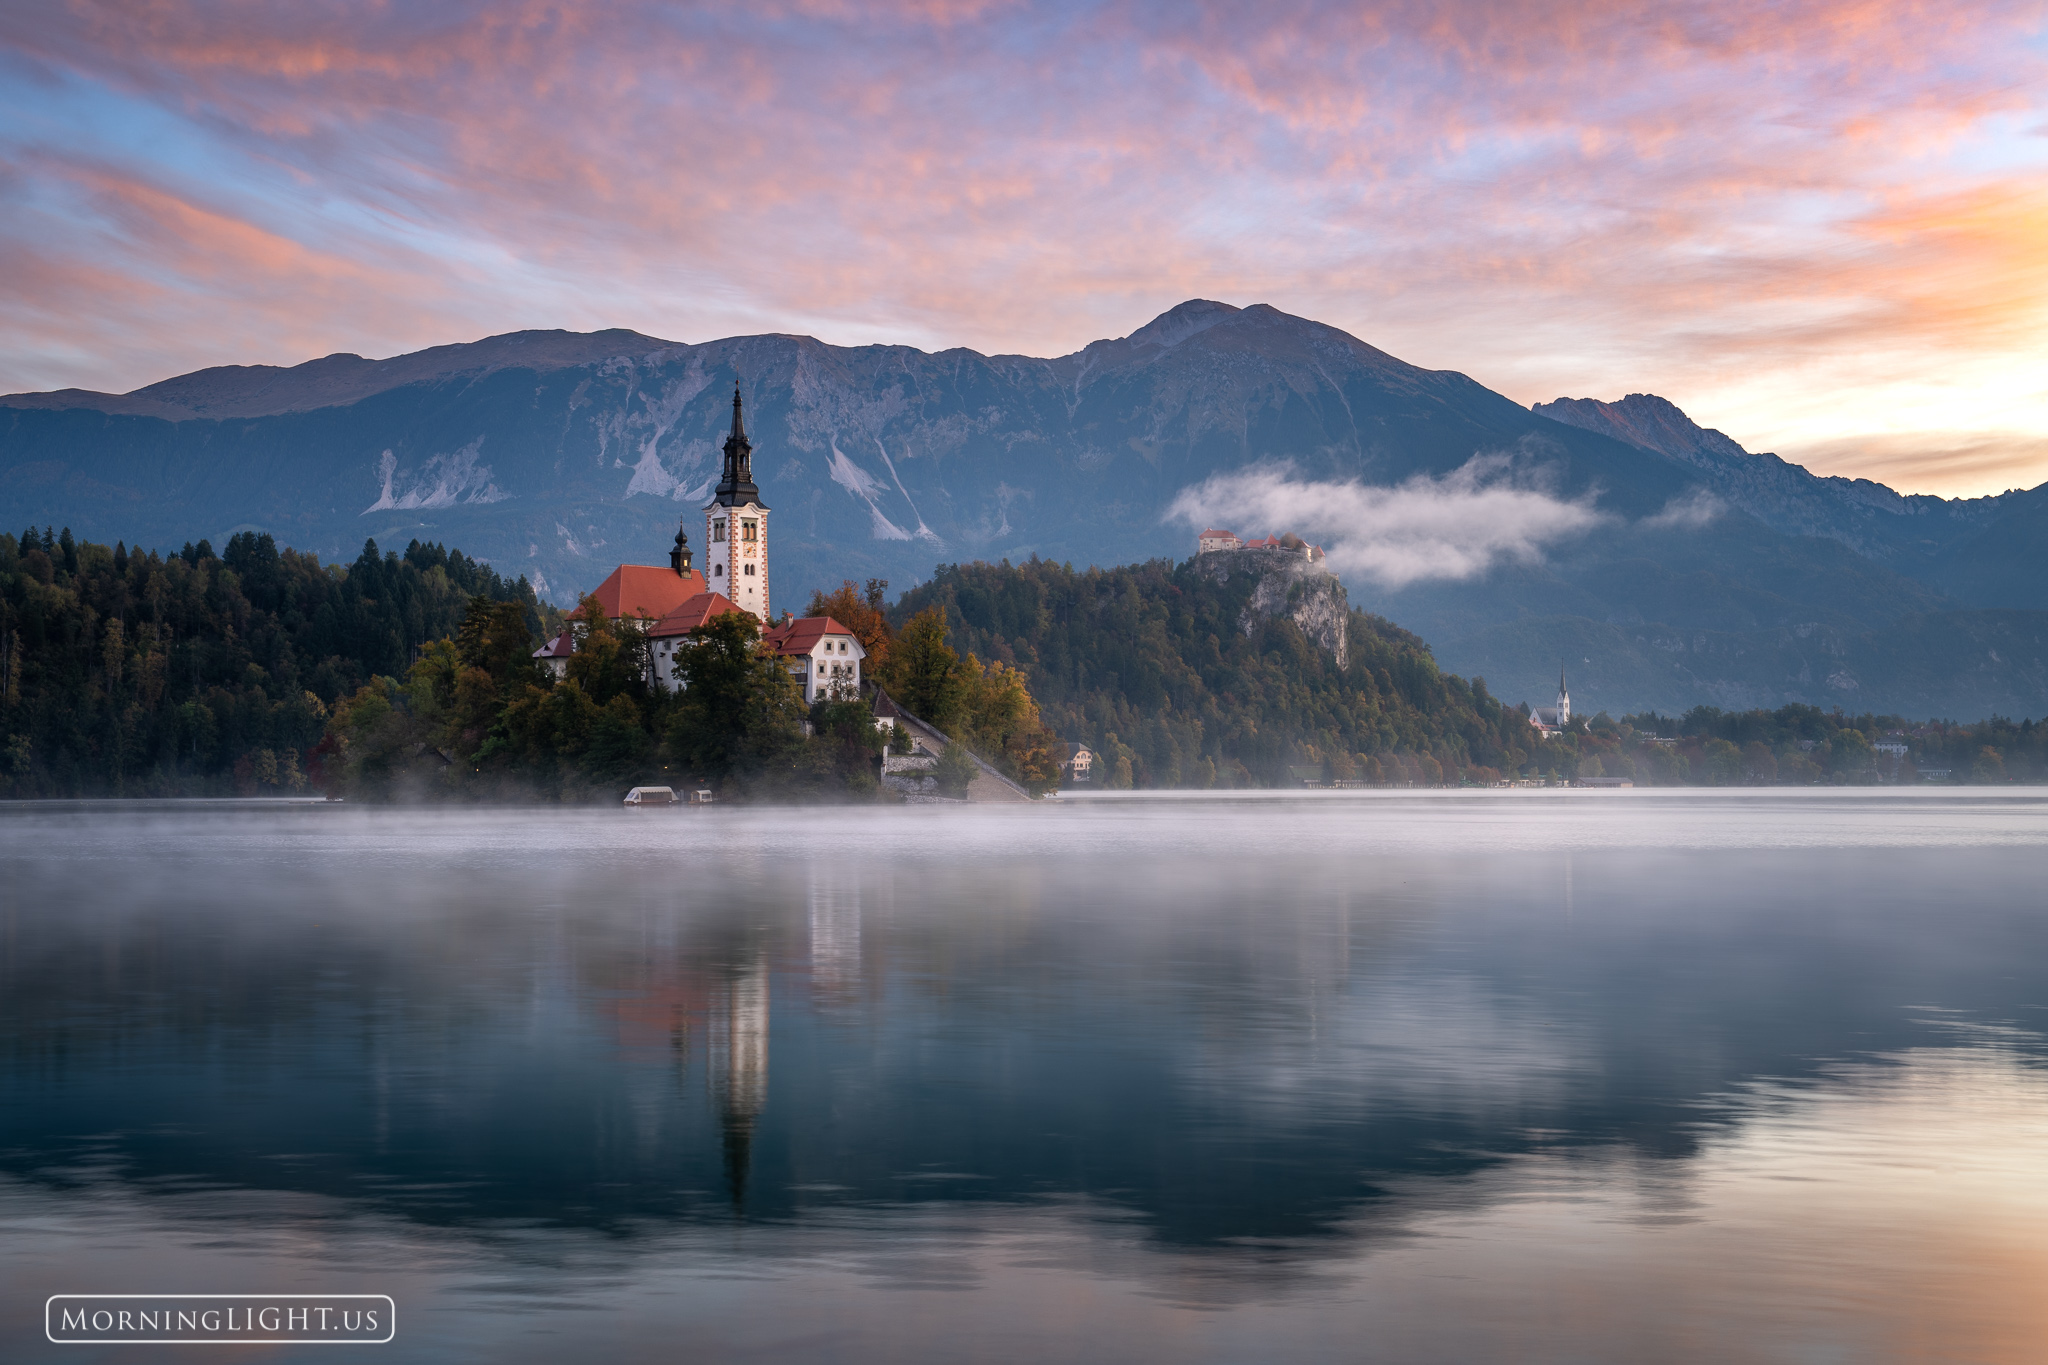 Fog floats over Lake Bled and above the fairyland castle perched high above the lake on this glorious October morning.